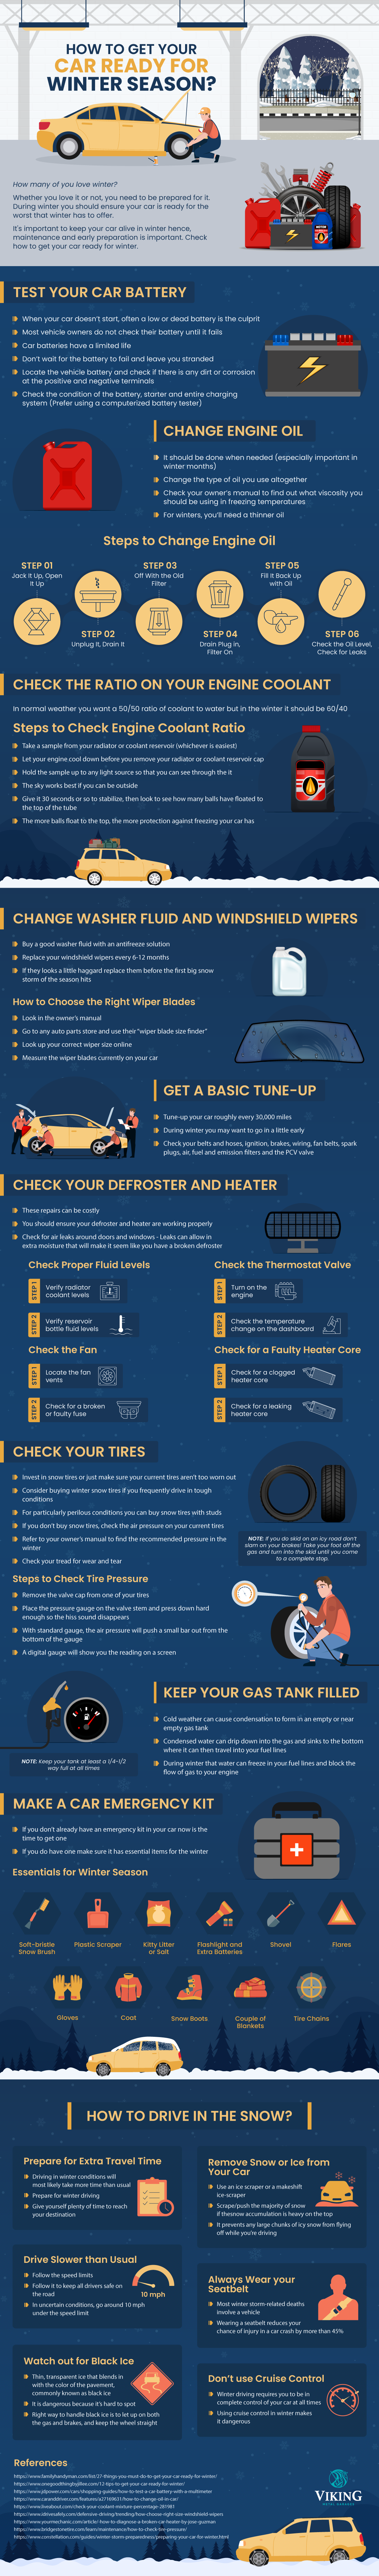 How to Get Your Car Ready for Winter Season?